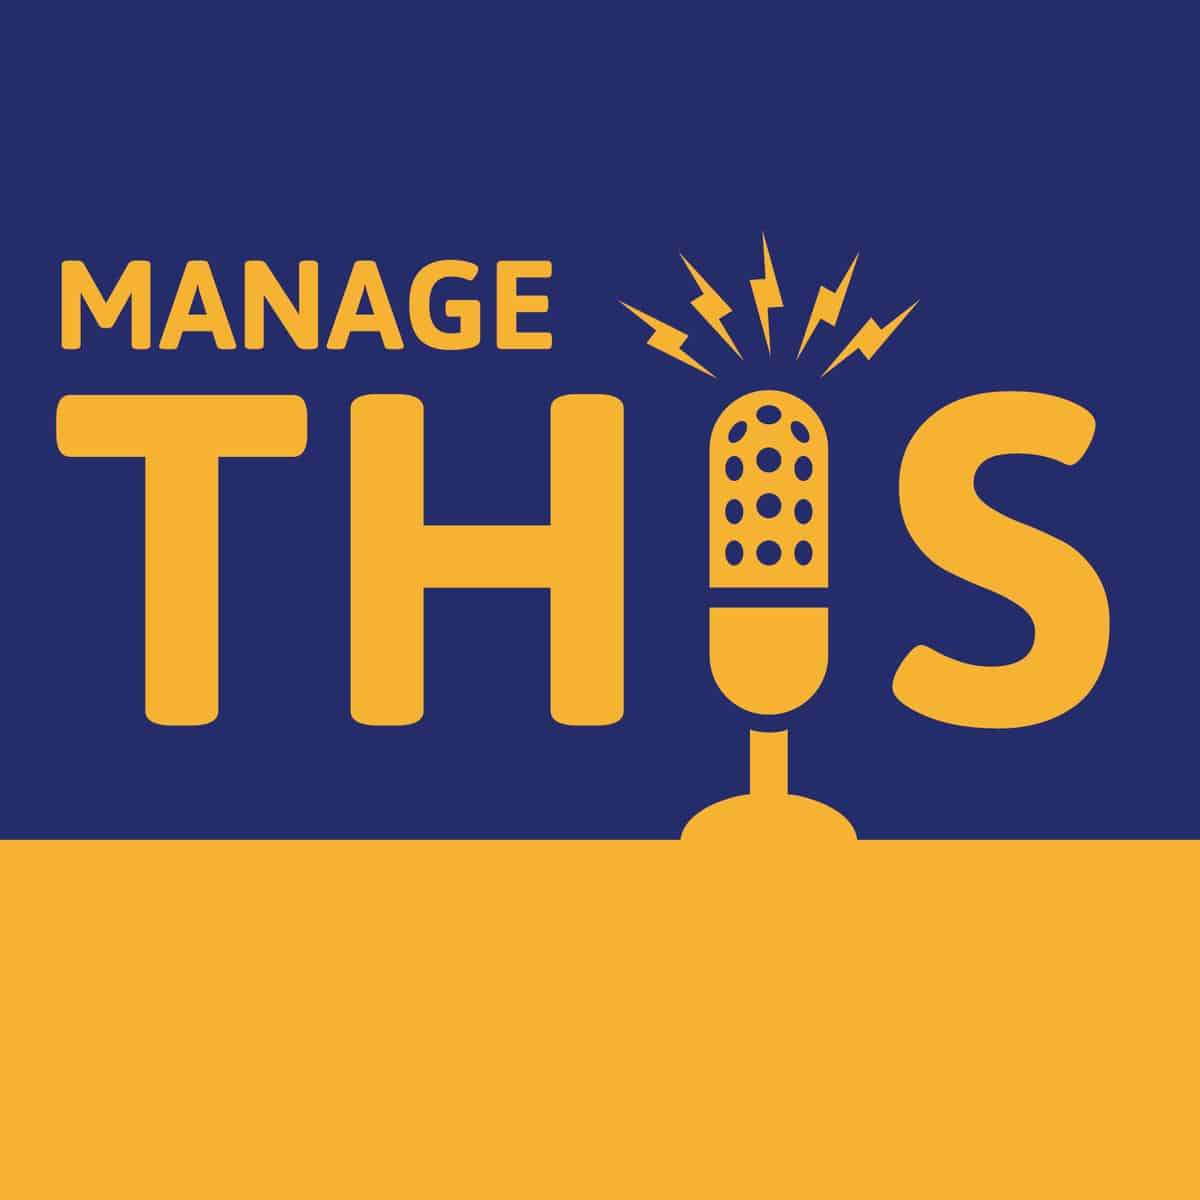 Episode 52- The PMP Exam: 6th Edition Changes, What to Expect, and Tips to Pass